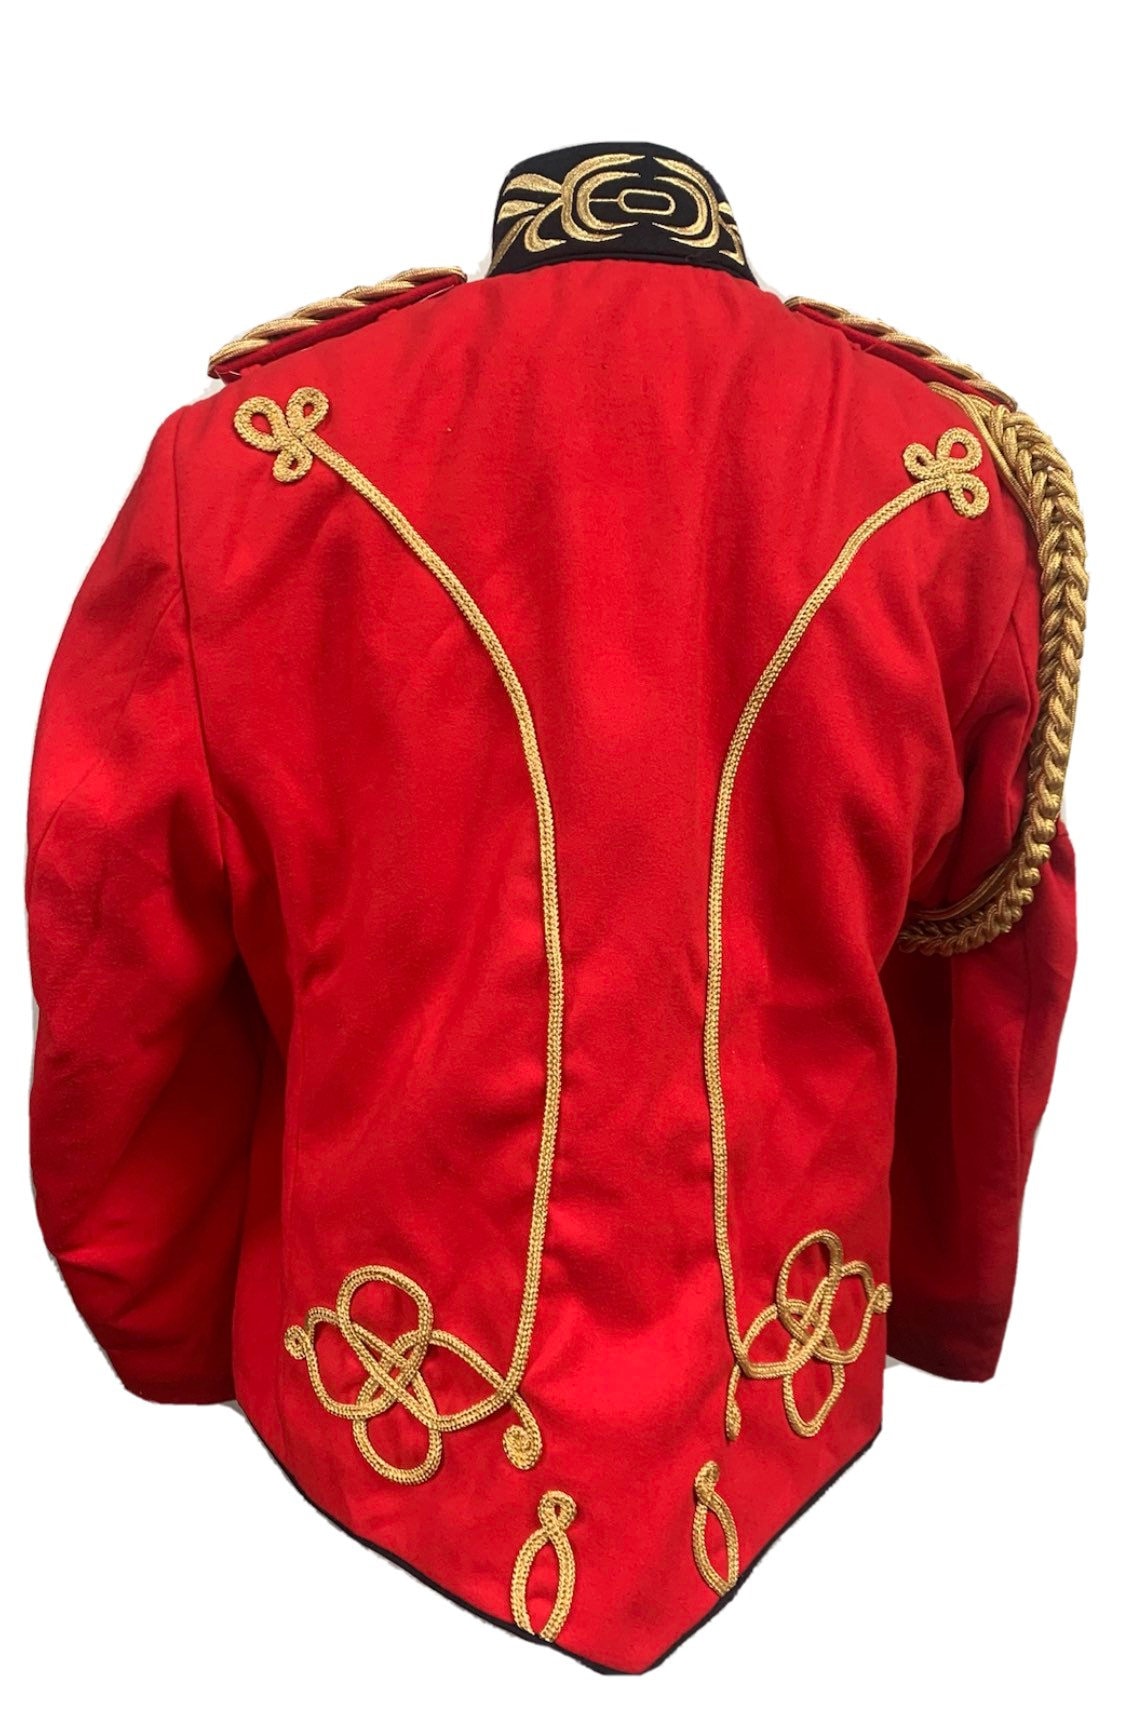 Mens Military Red Gold Braid Officers Jacket Steampunk - Etsy UK